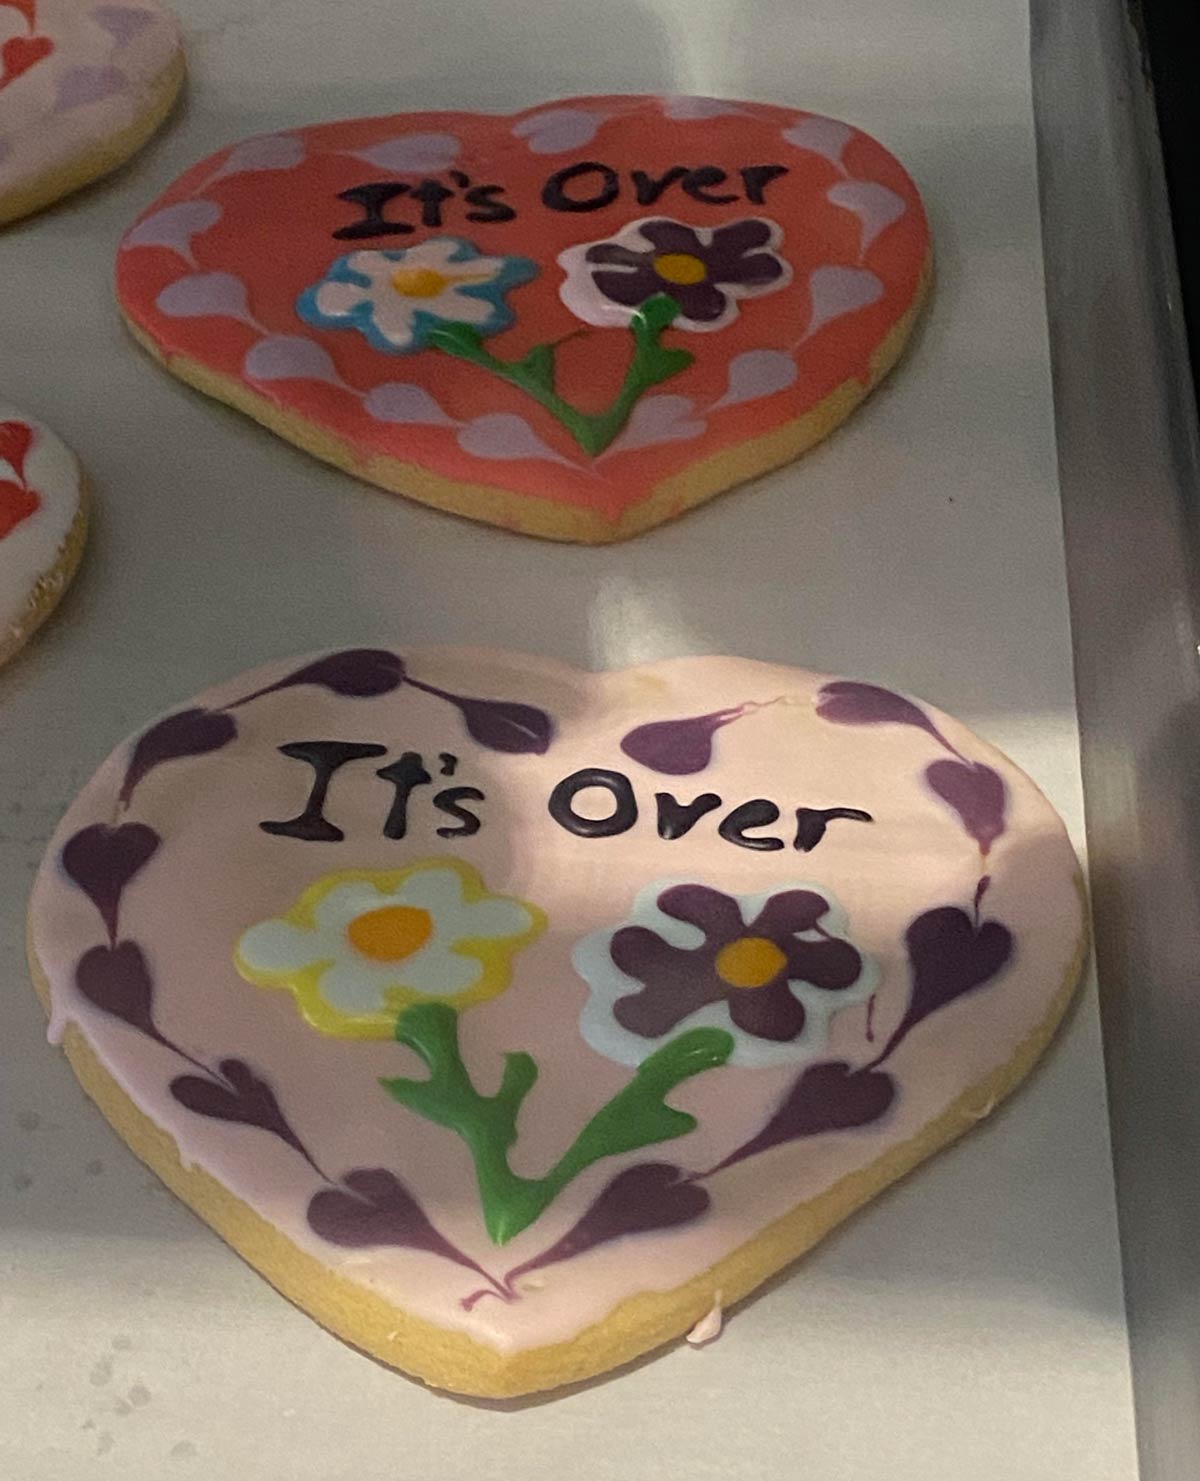 My local cafe's "Valentines" cookies